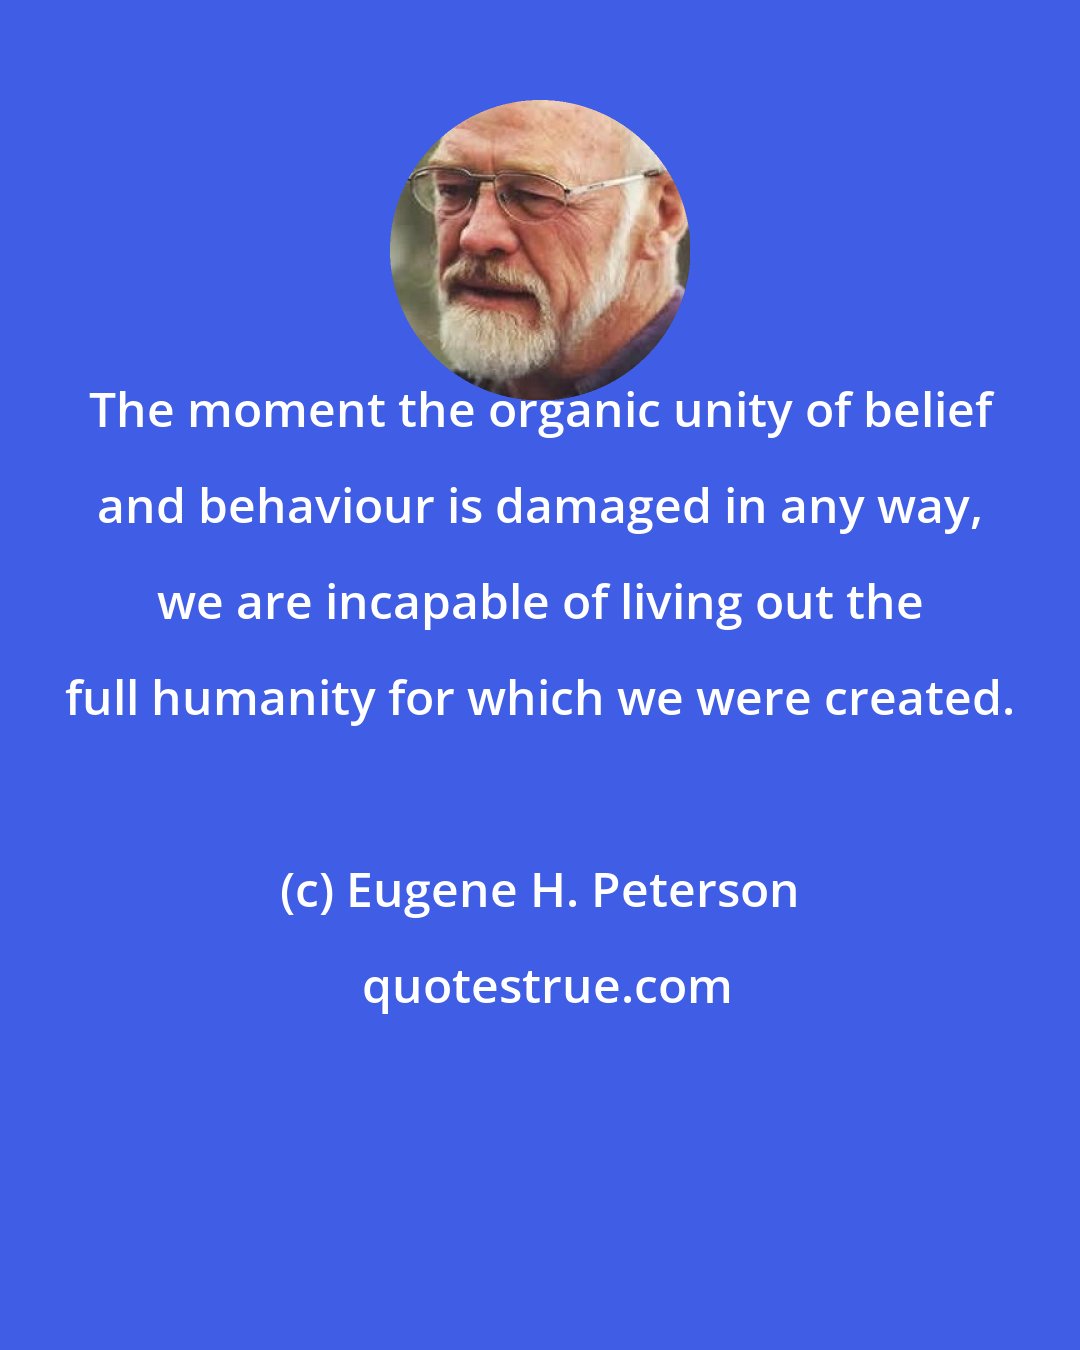 Eugene H. Peterson: The moment the organic unity of belief and behaviour is damaged in any way, we are incapable of living out the full humanity for which we were created.